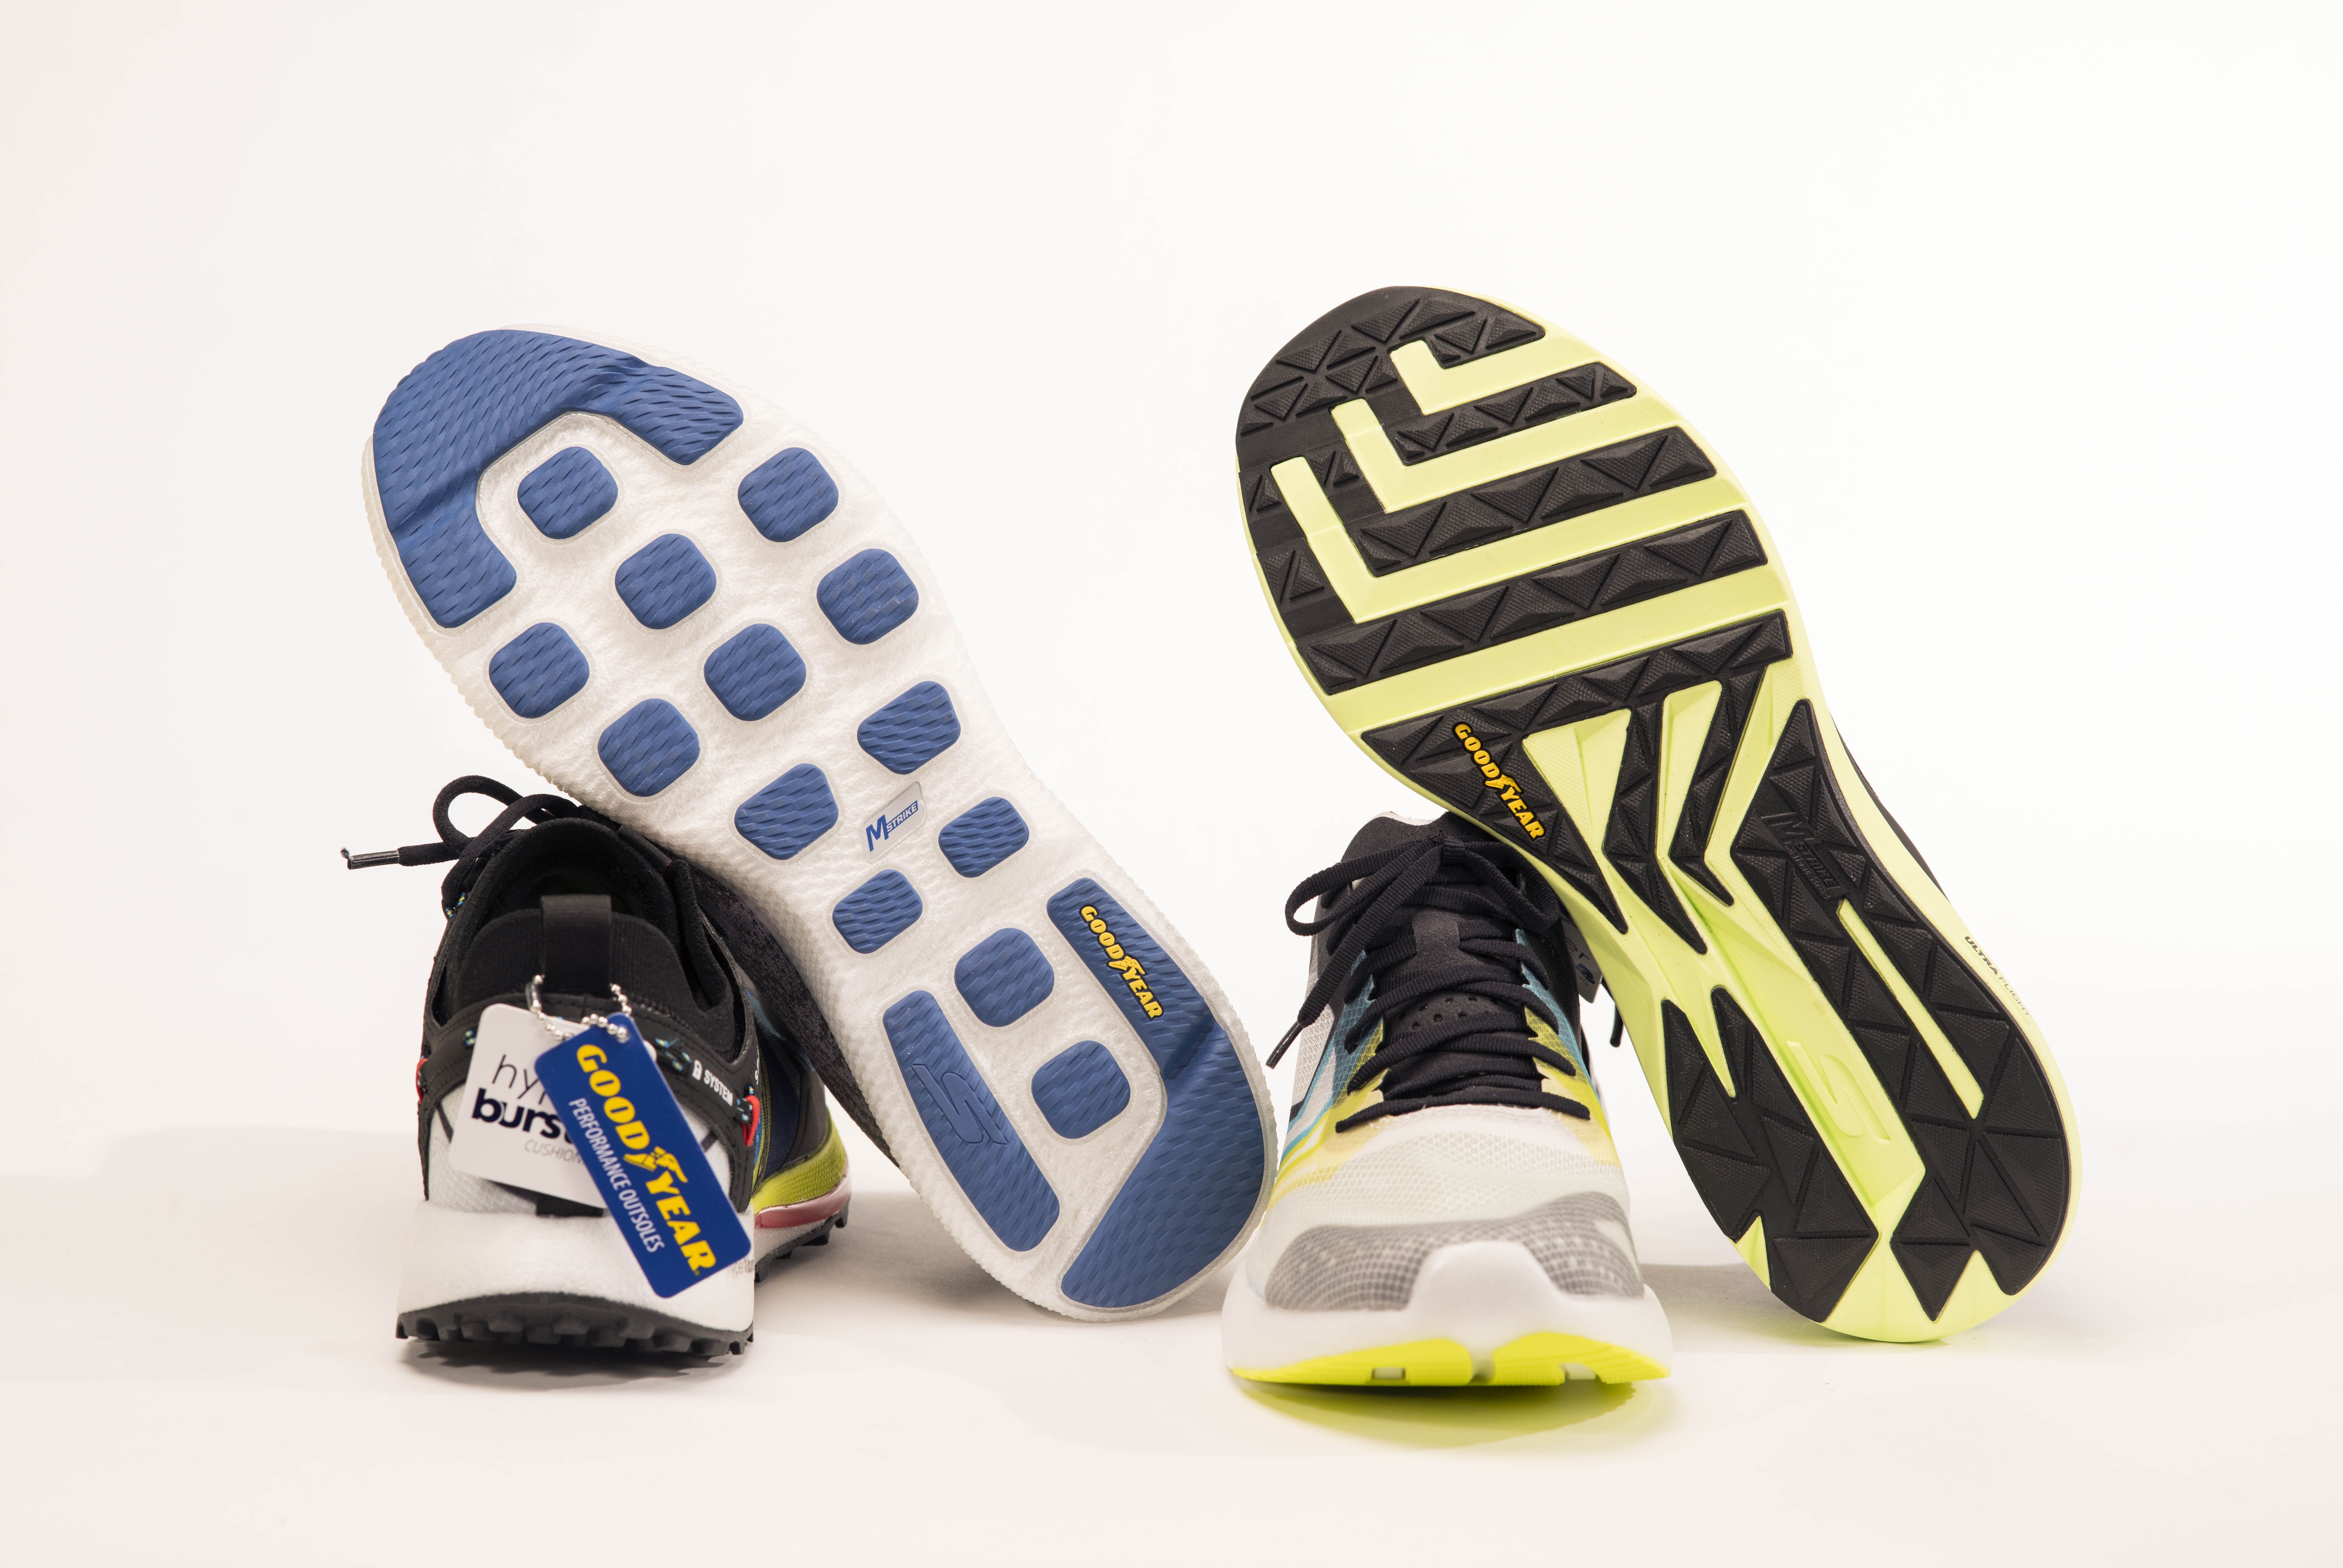 Skechers partners with Goodyear Tire & Rubber Co. on of sneakers